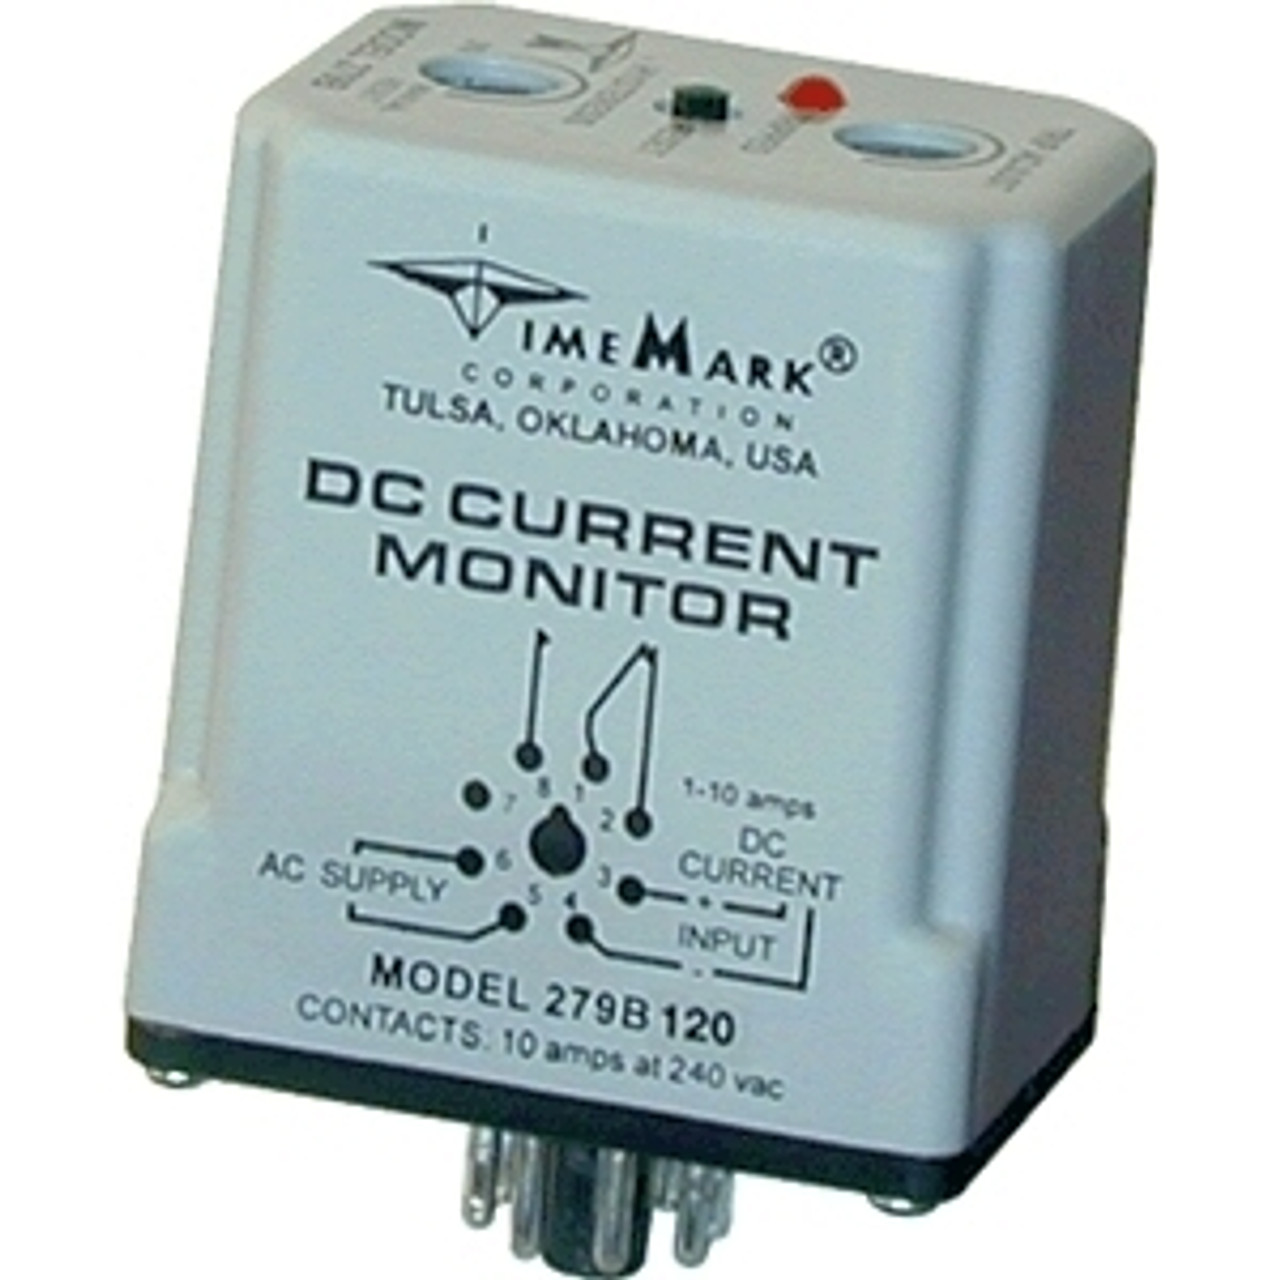 TimeMark 279CA-120 Current Monitor Relays